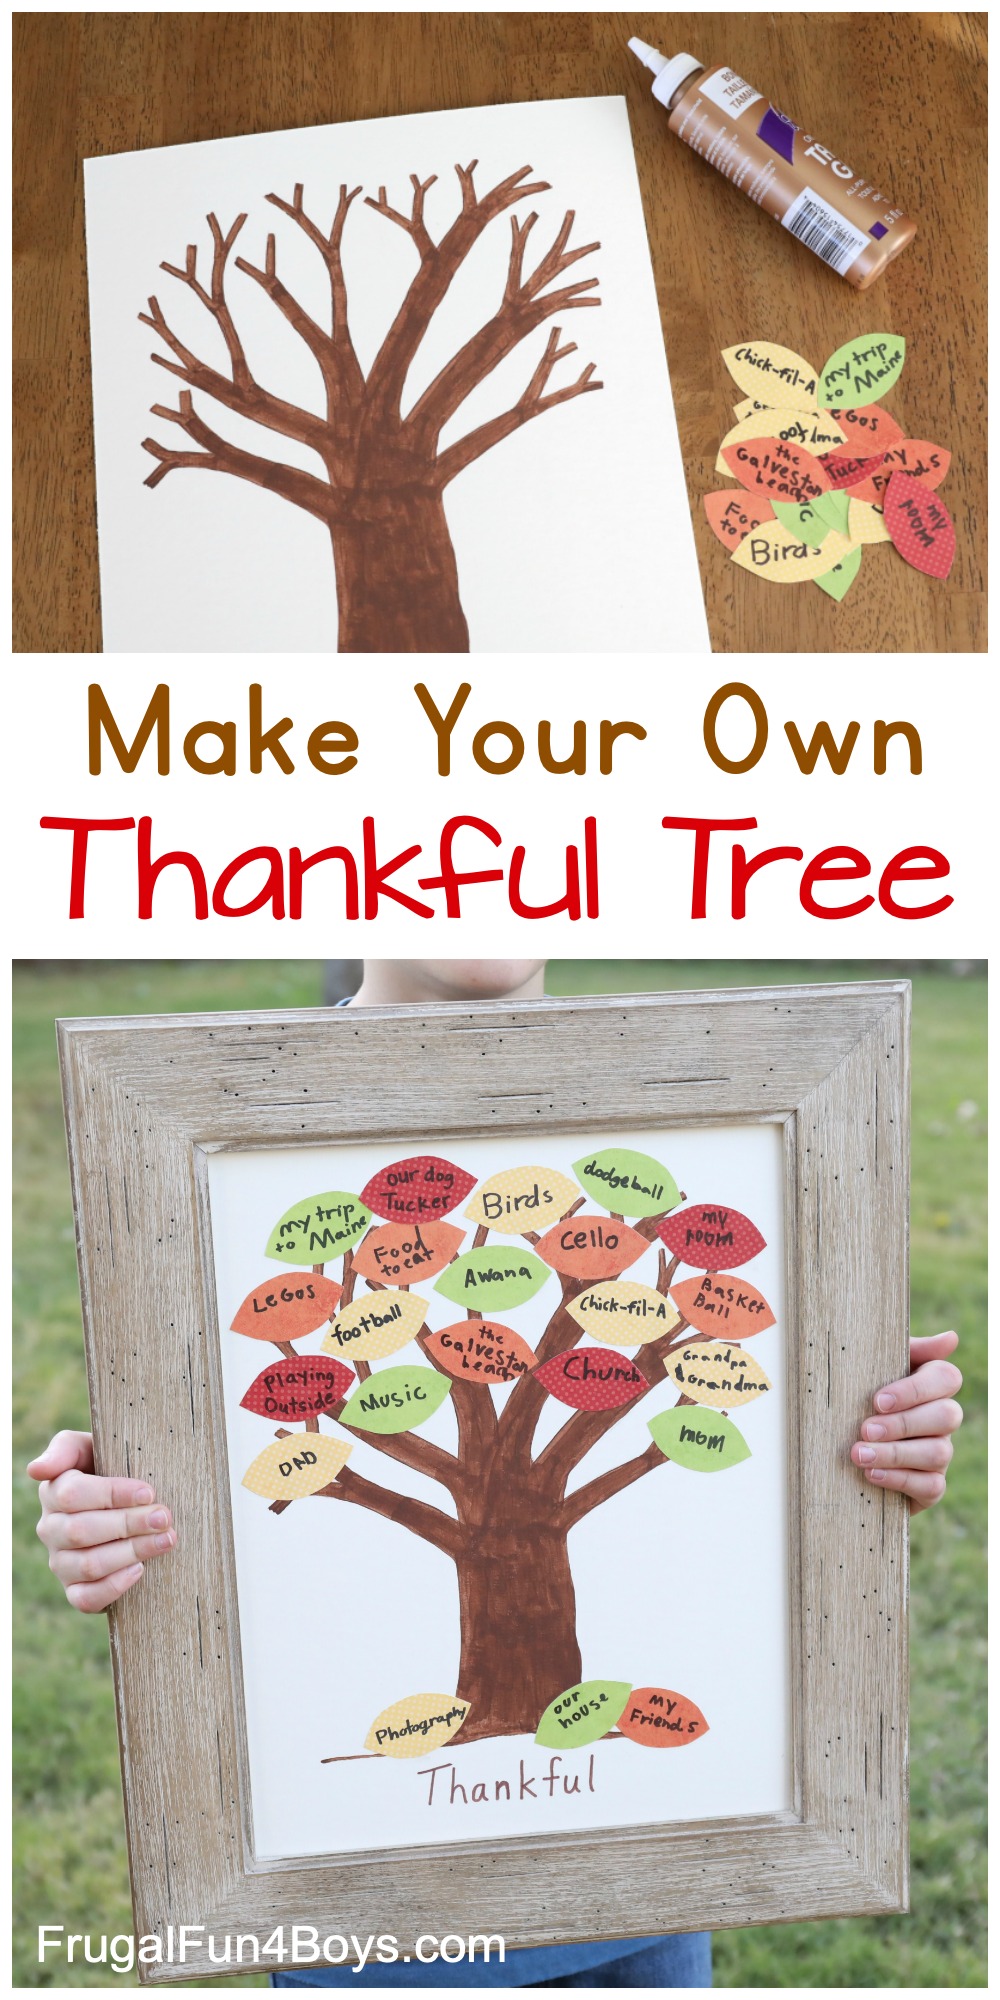 How to Make a Thankful Tree